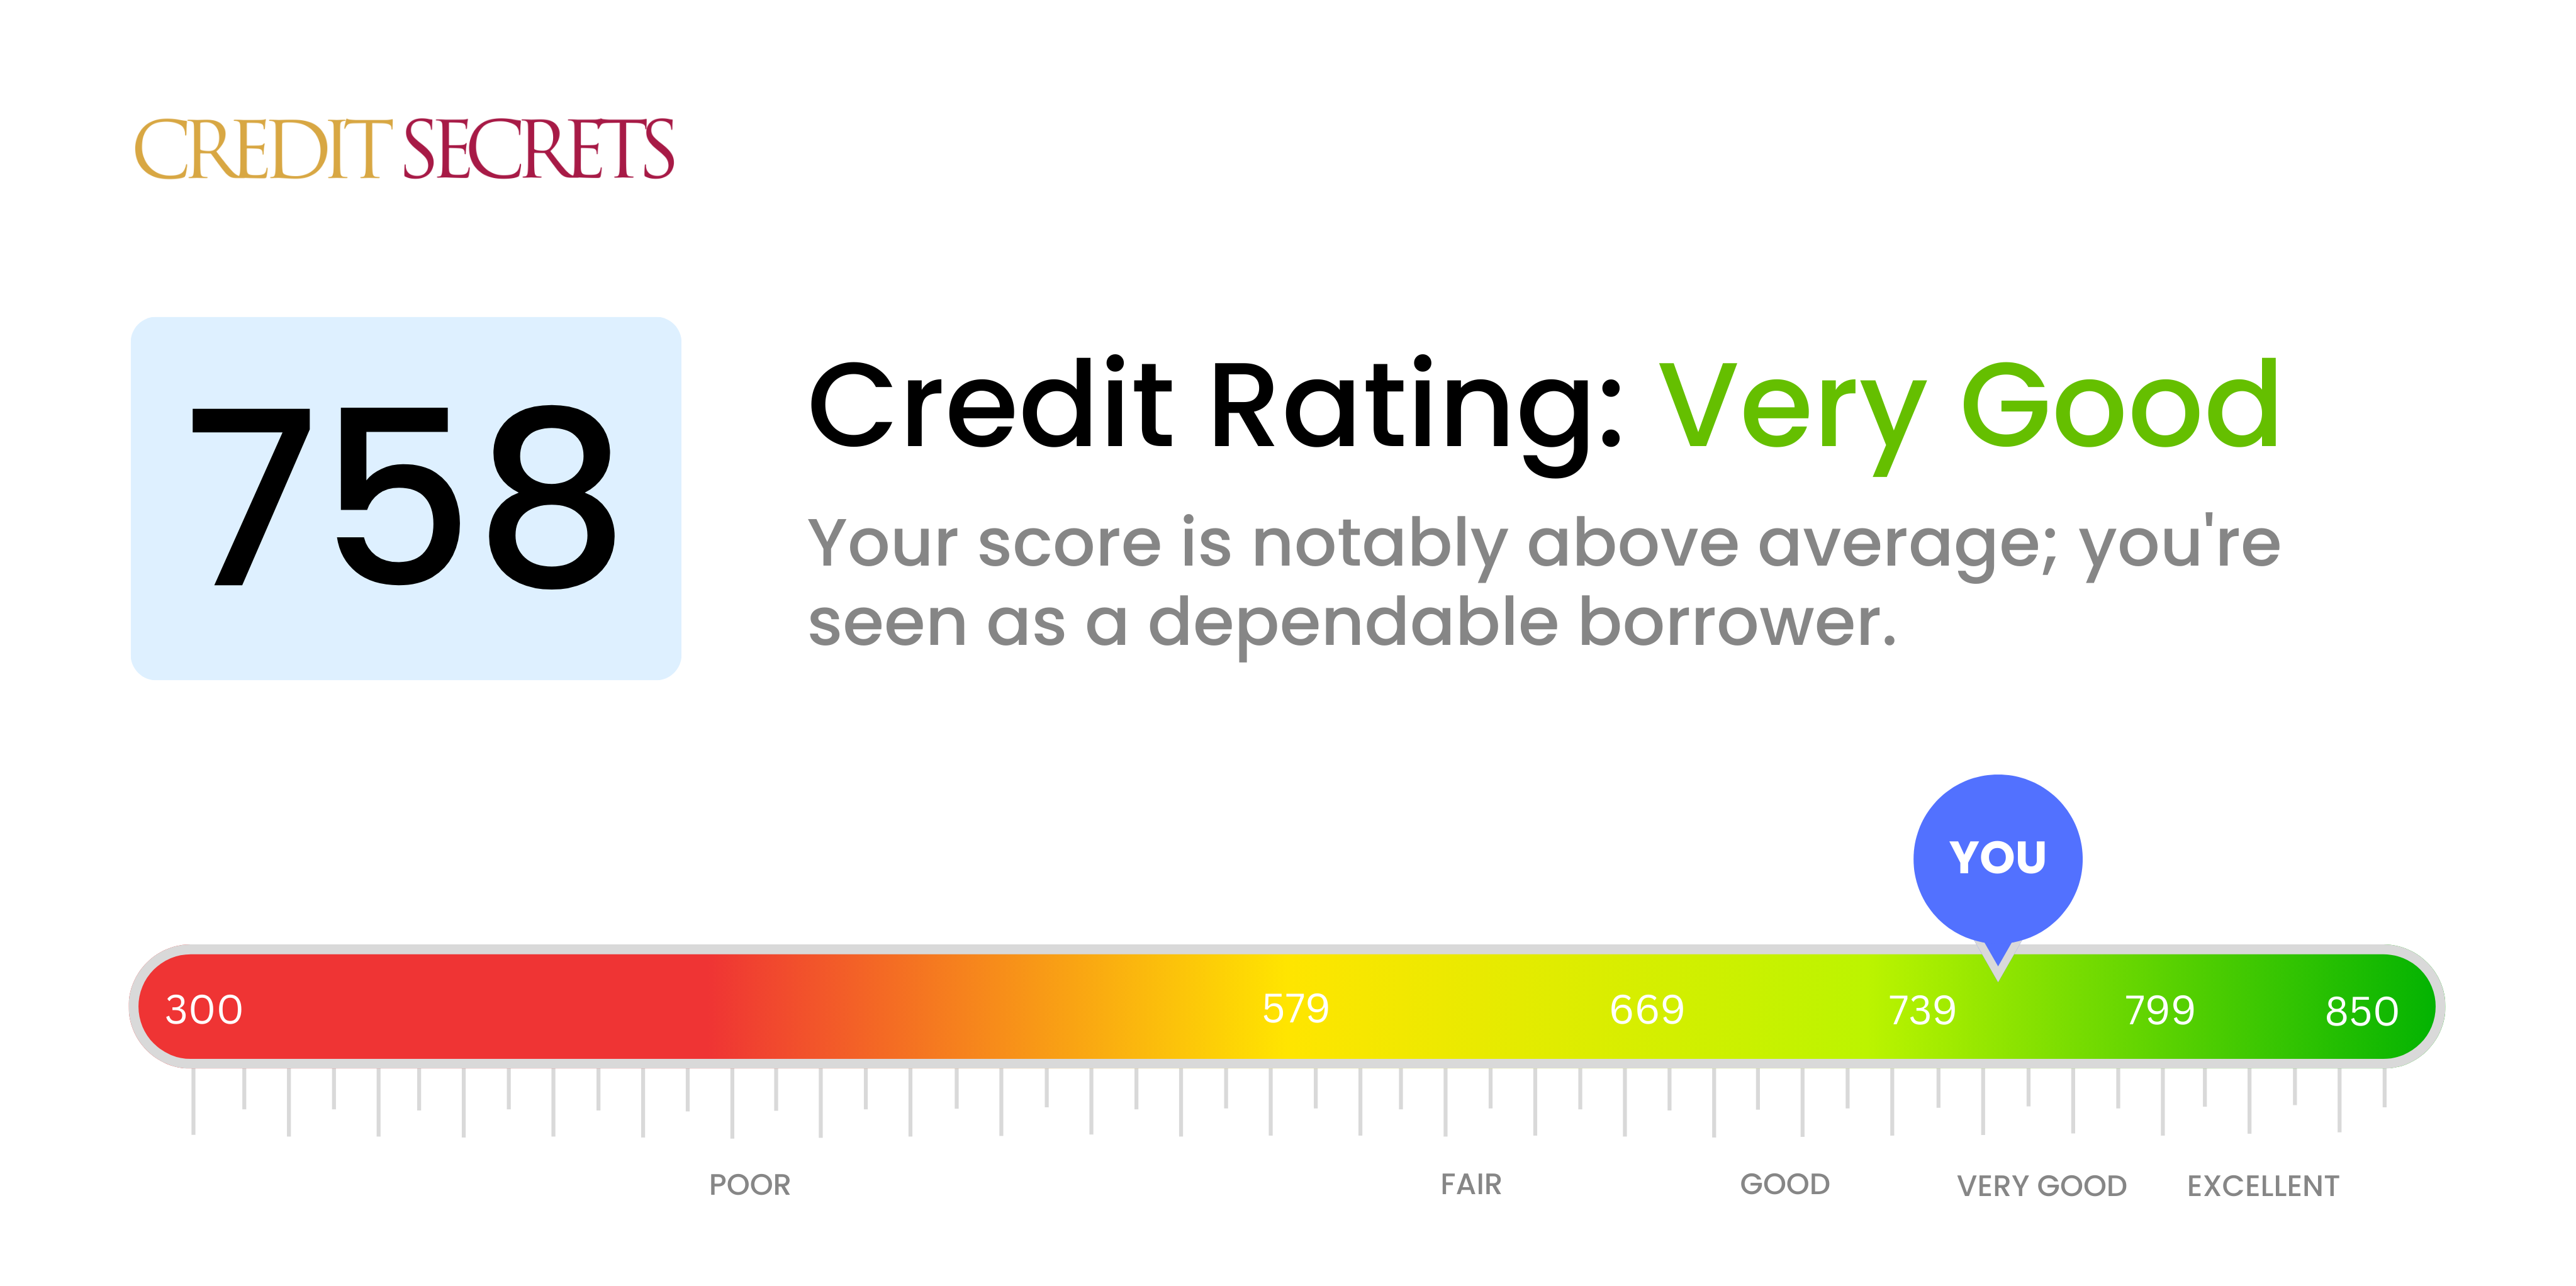 Is 758 a good credit score?